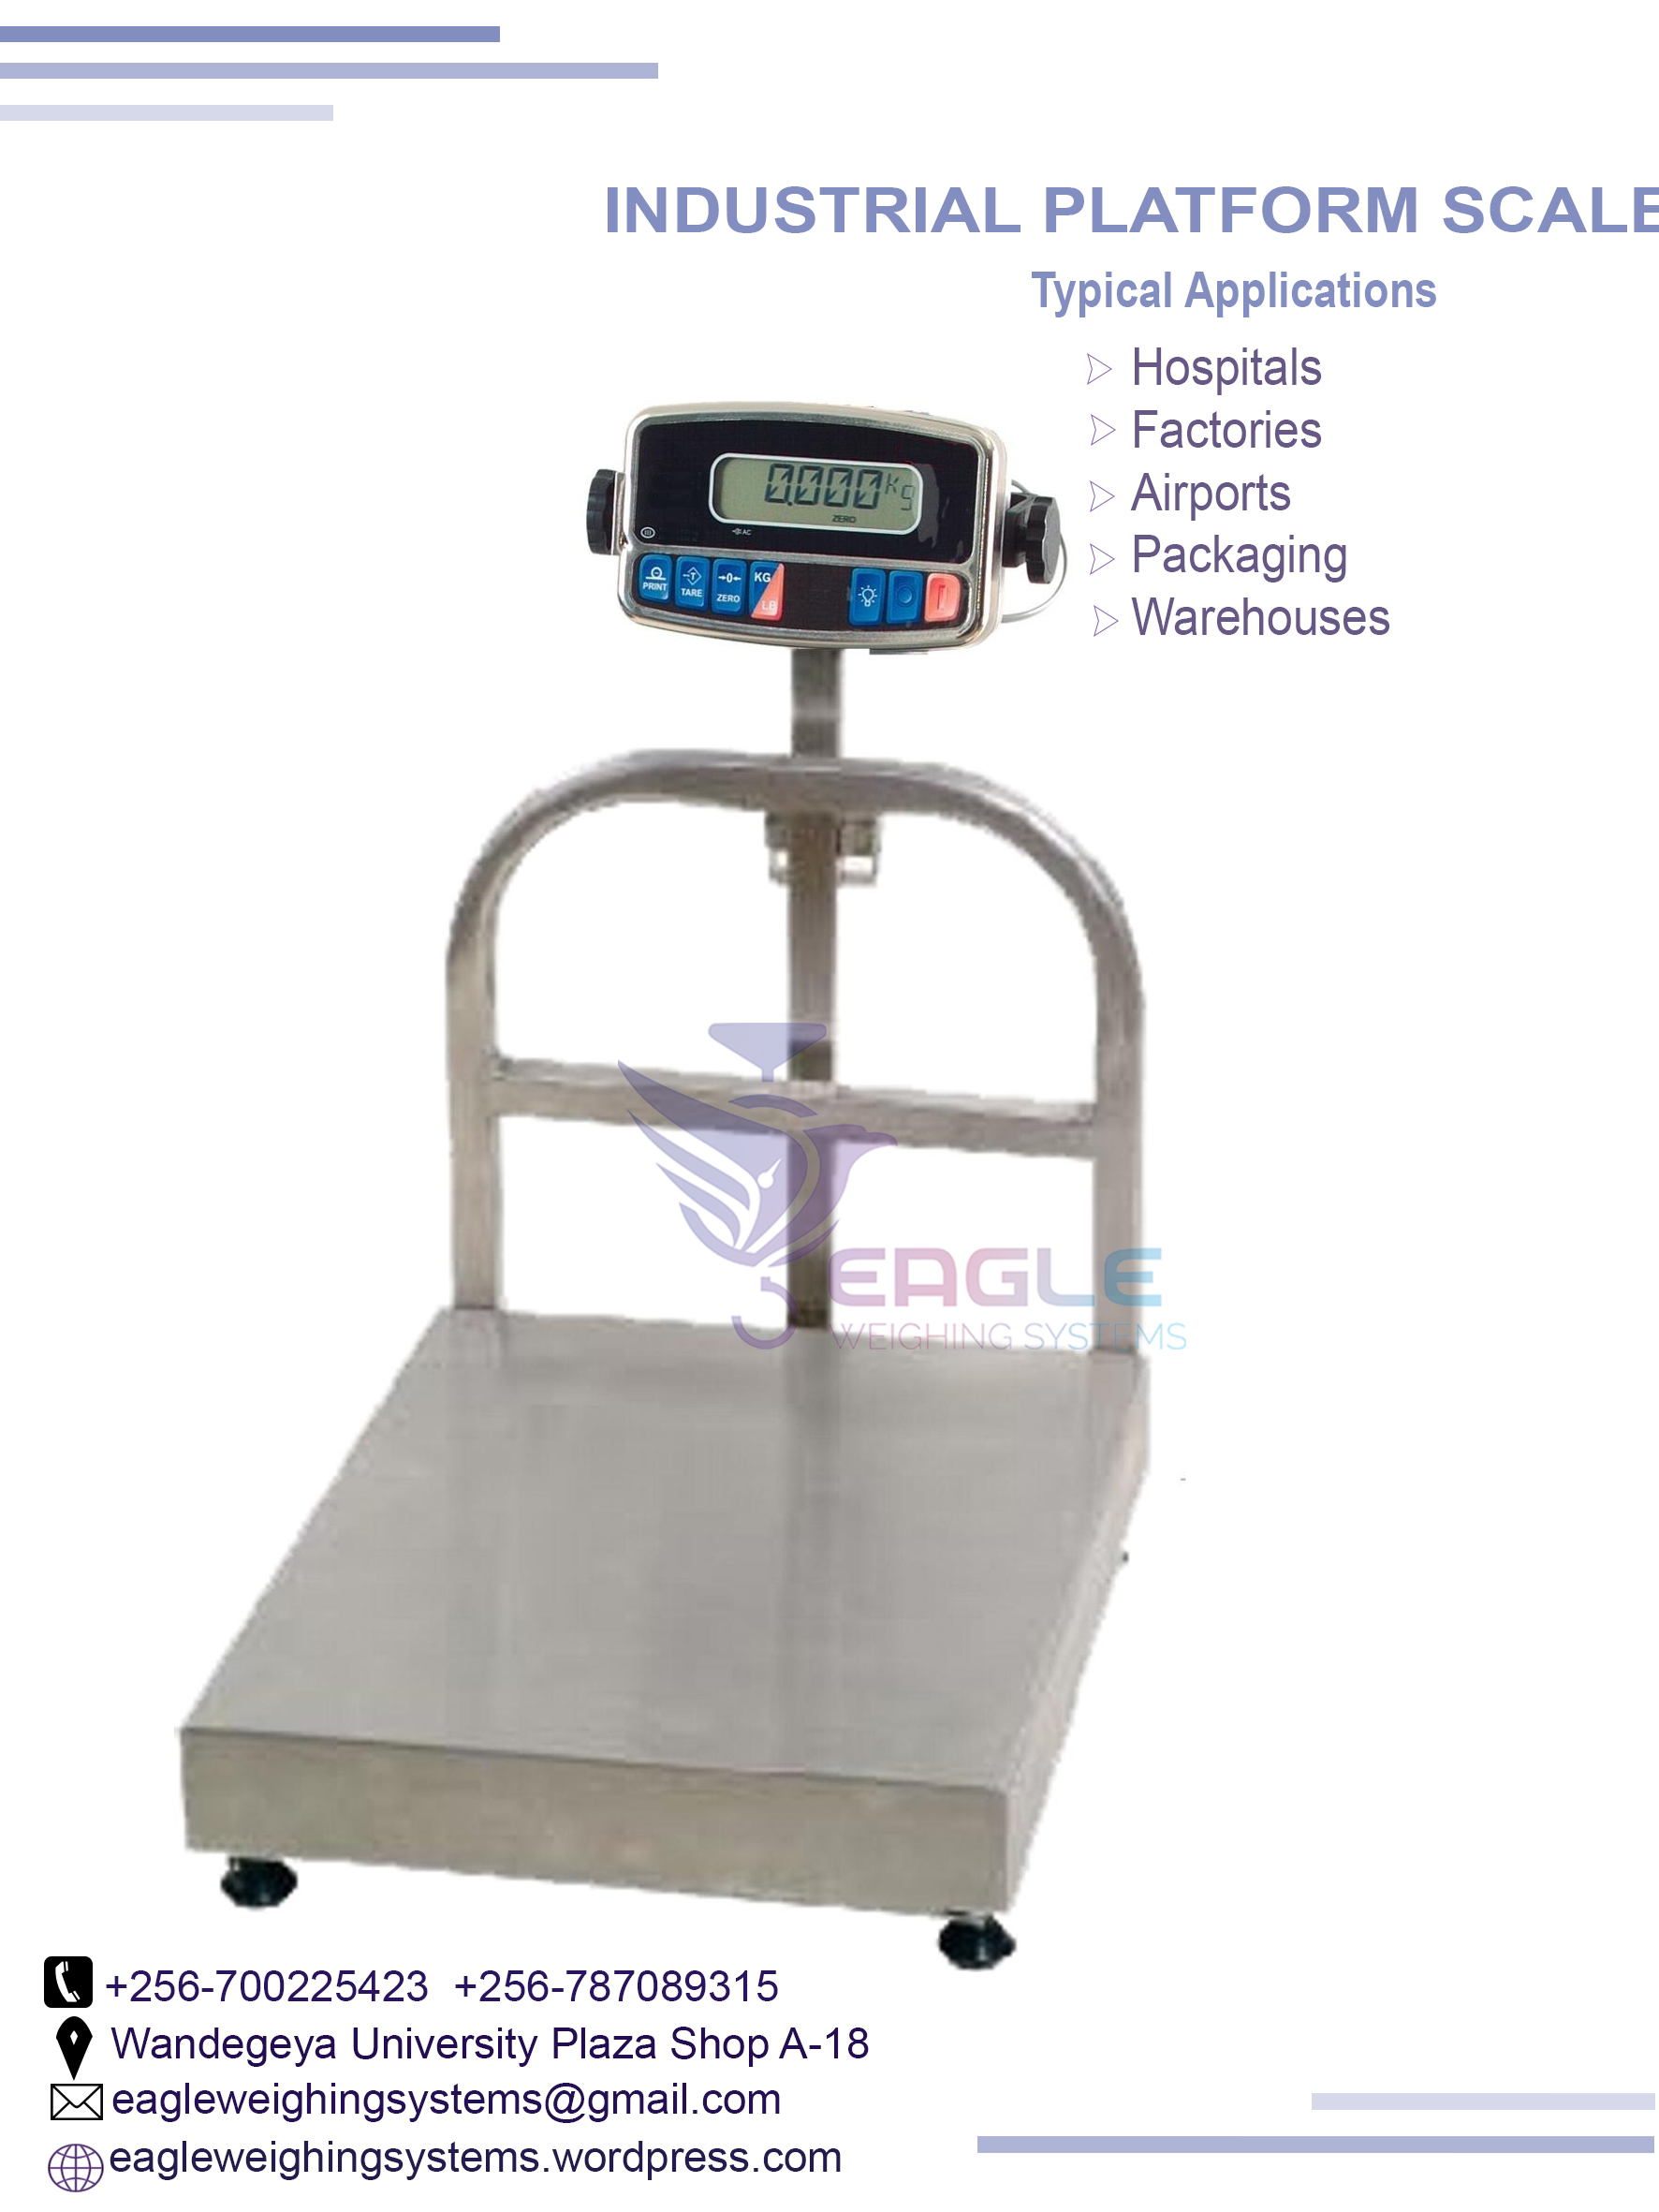 Quality Digital Counting Weight Balance Wireless Platform Scale, Kampala Central Division, Central, Uganda